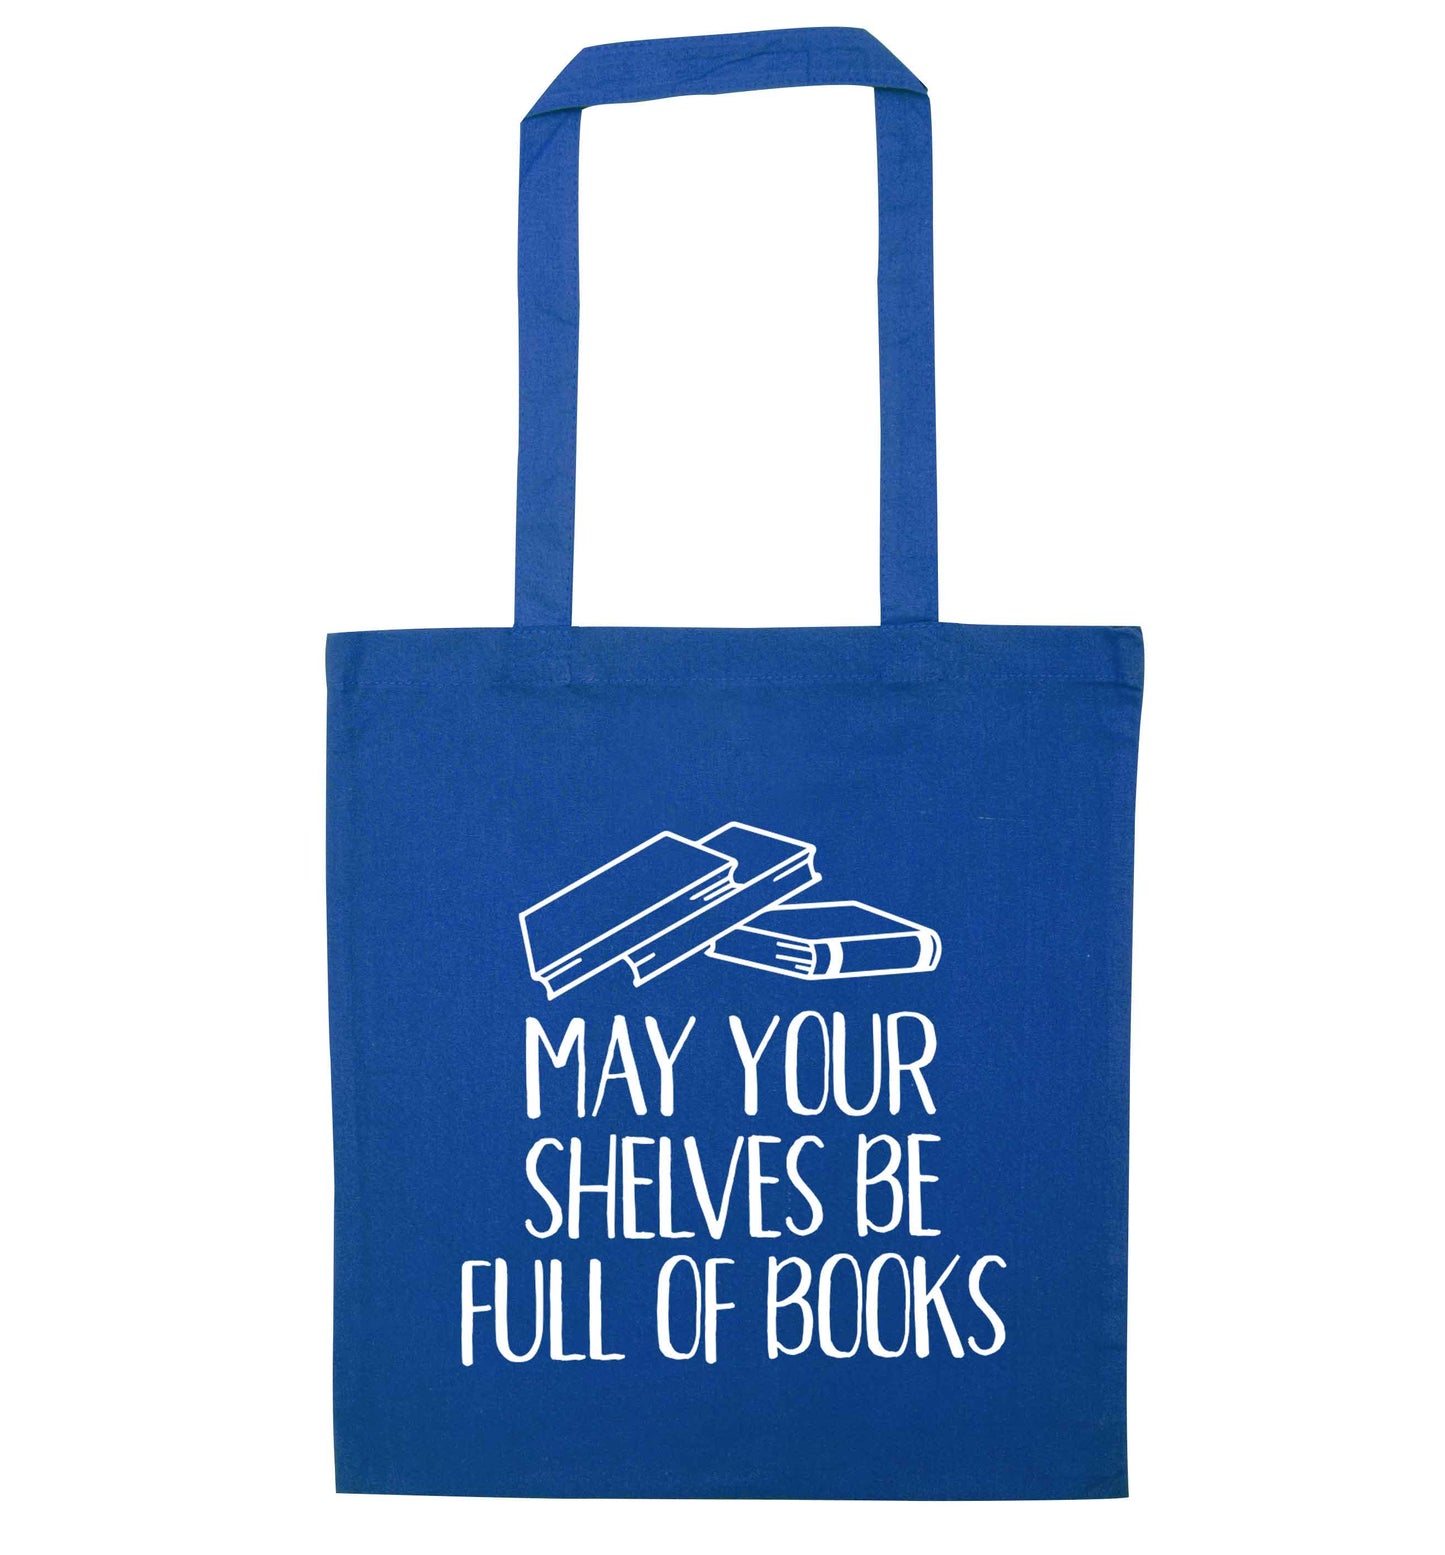 May your shelves be full of books blue tote bag